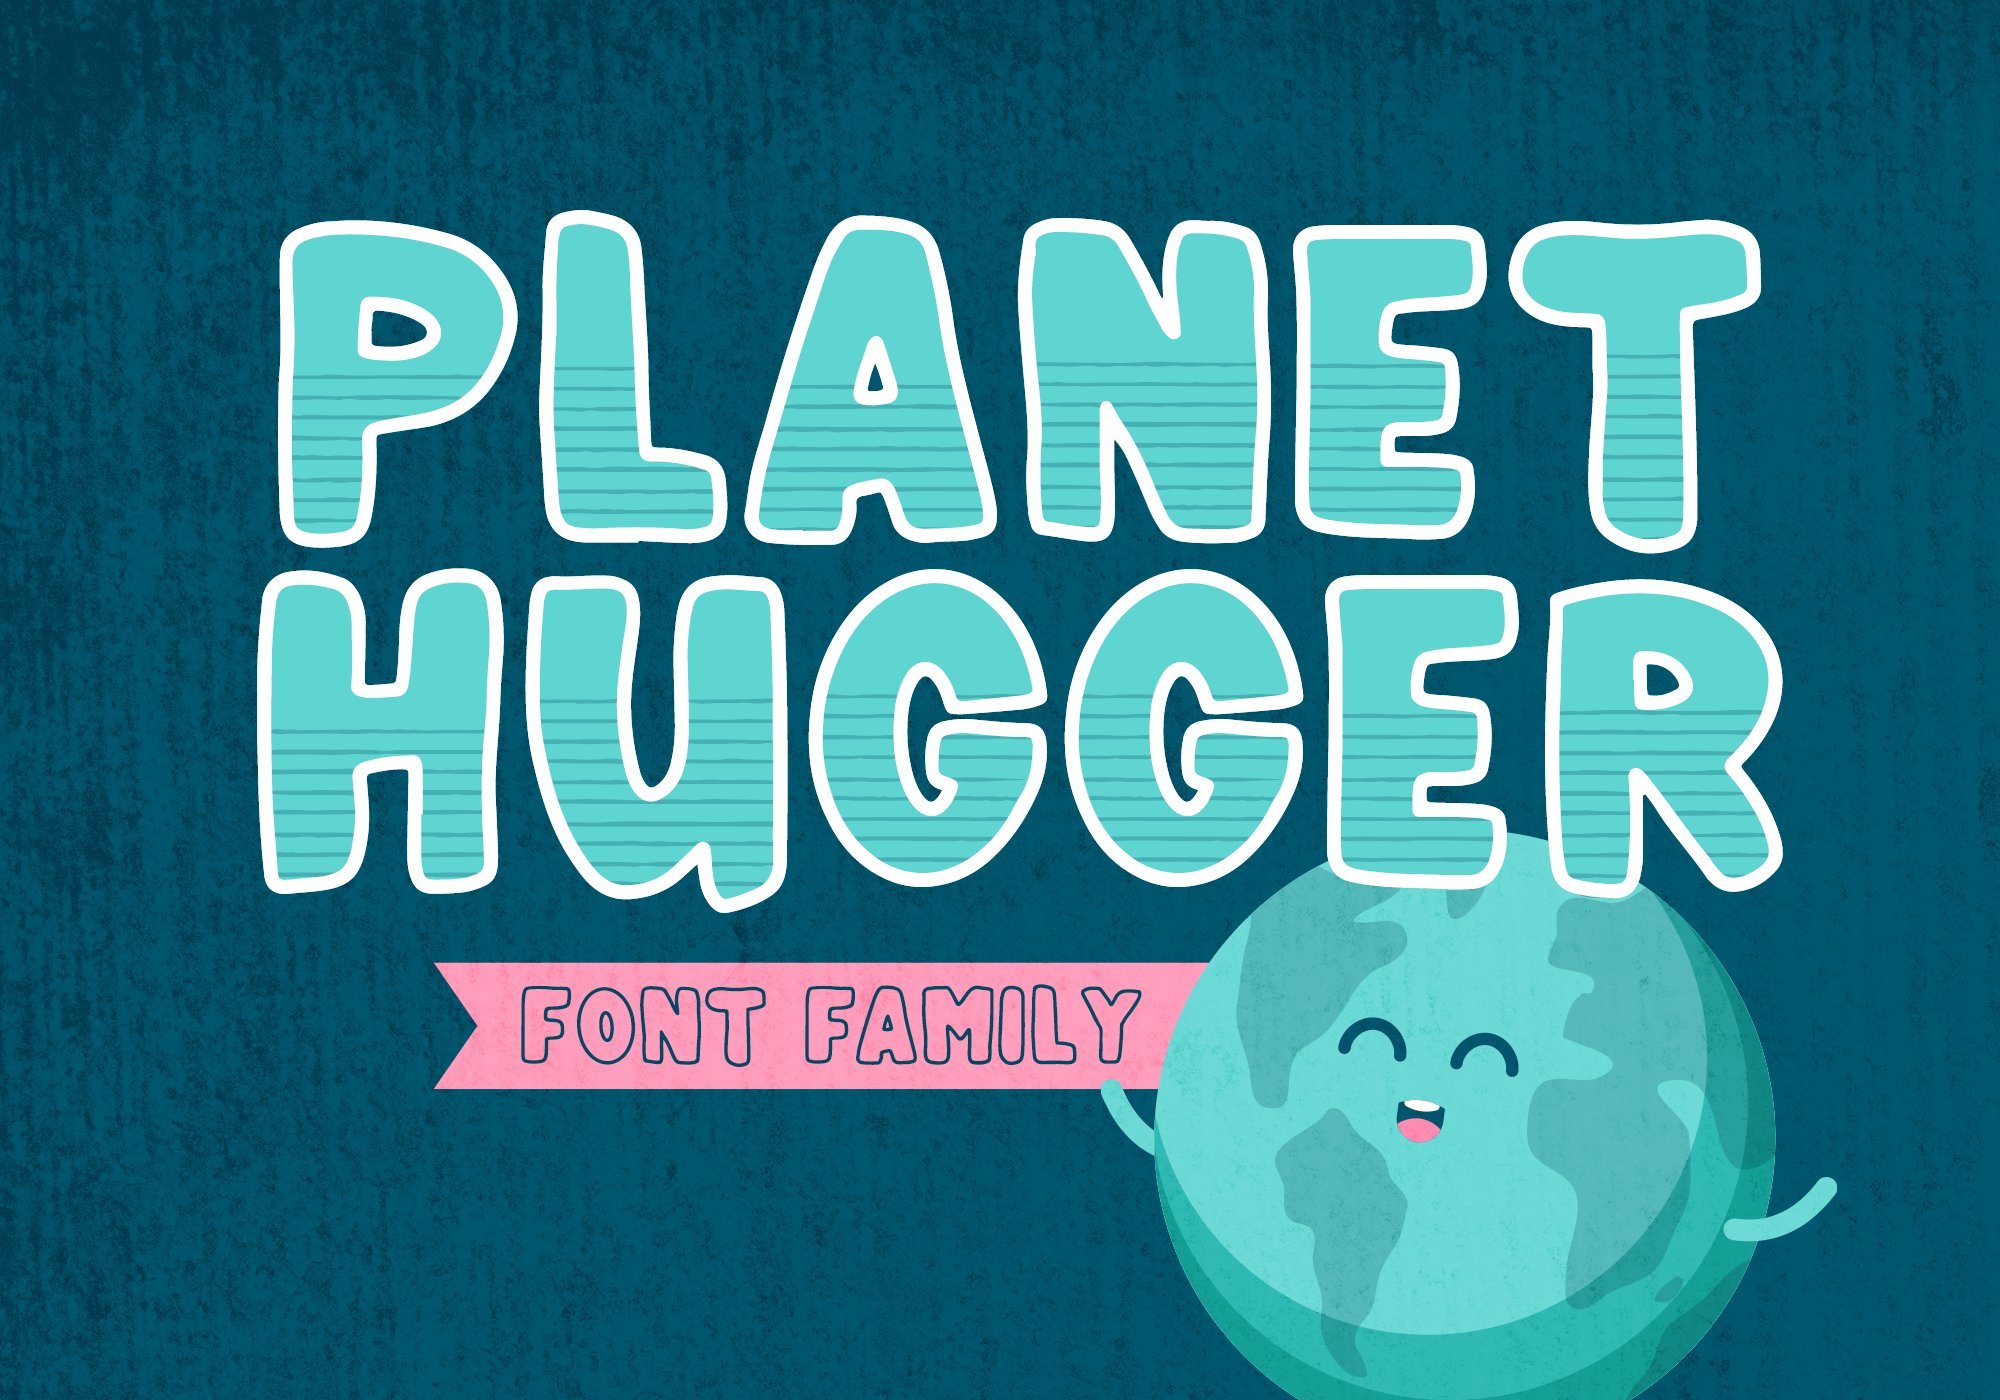 Planet Hugger - Layered Font Family cover image.